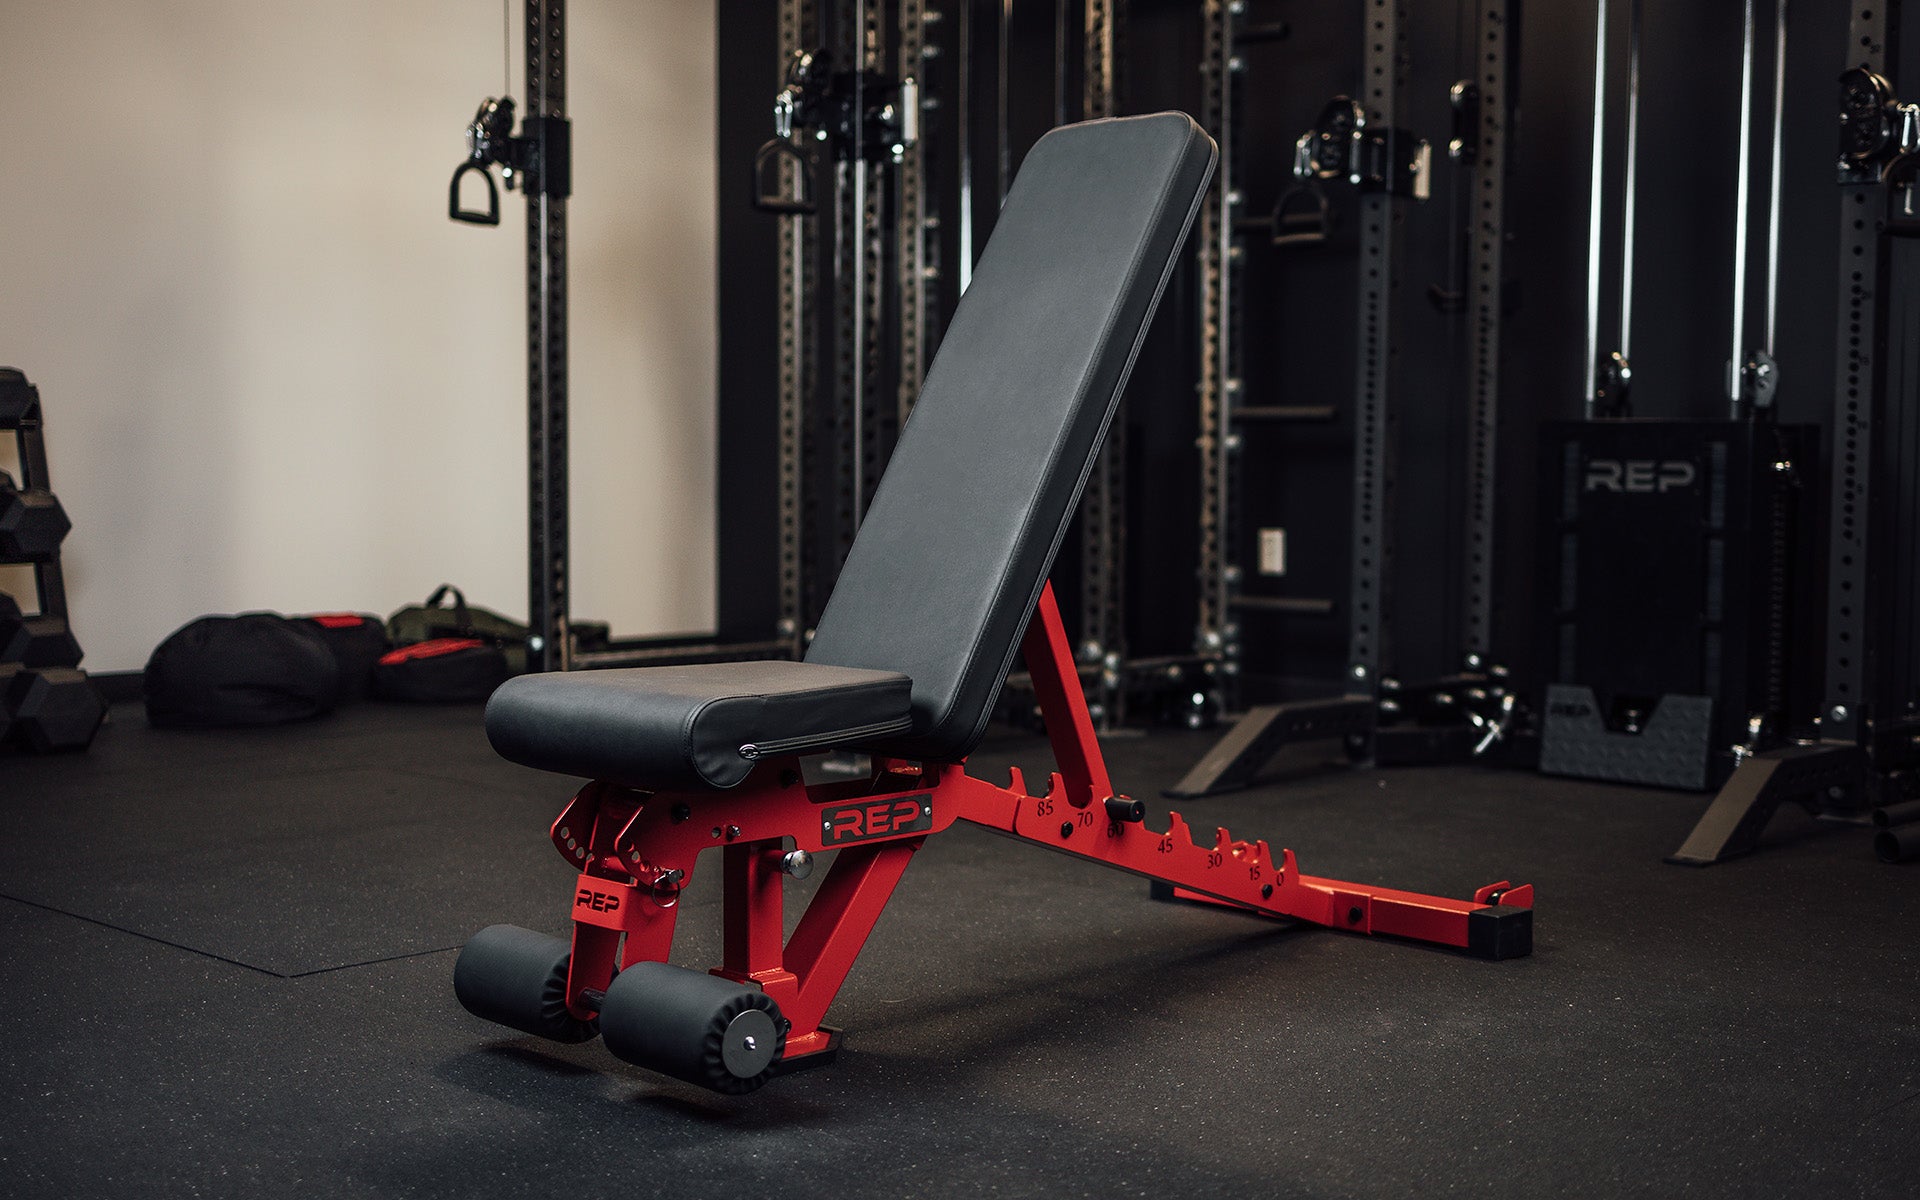 Adjustable Weight & Workout Bench